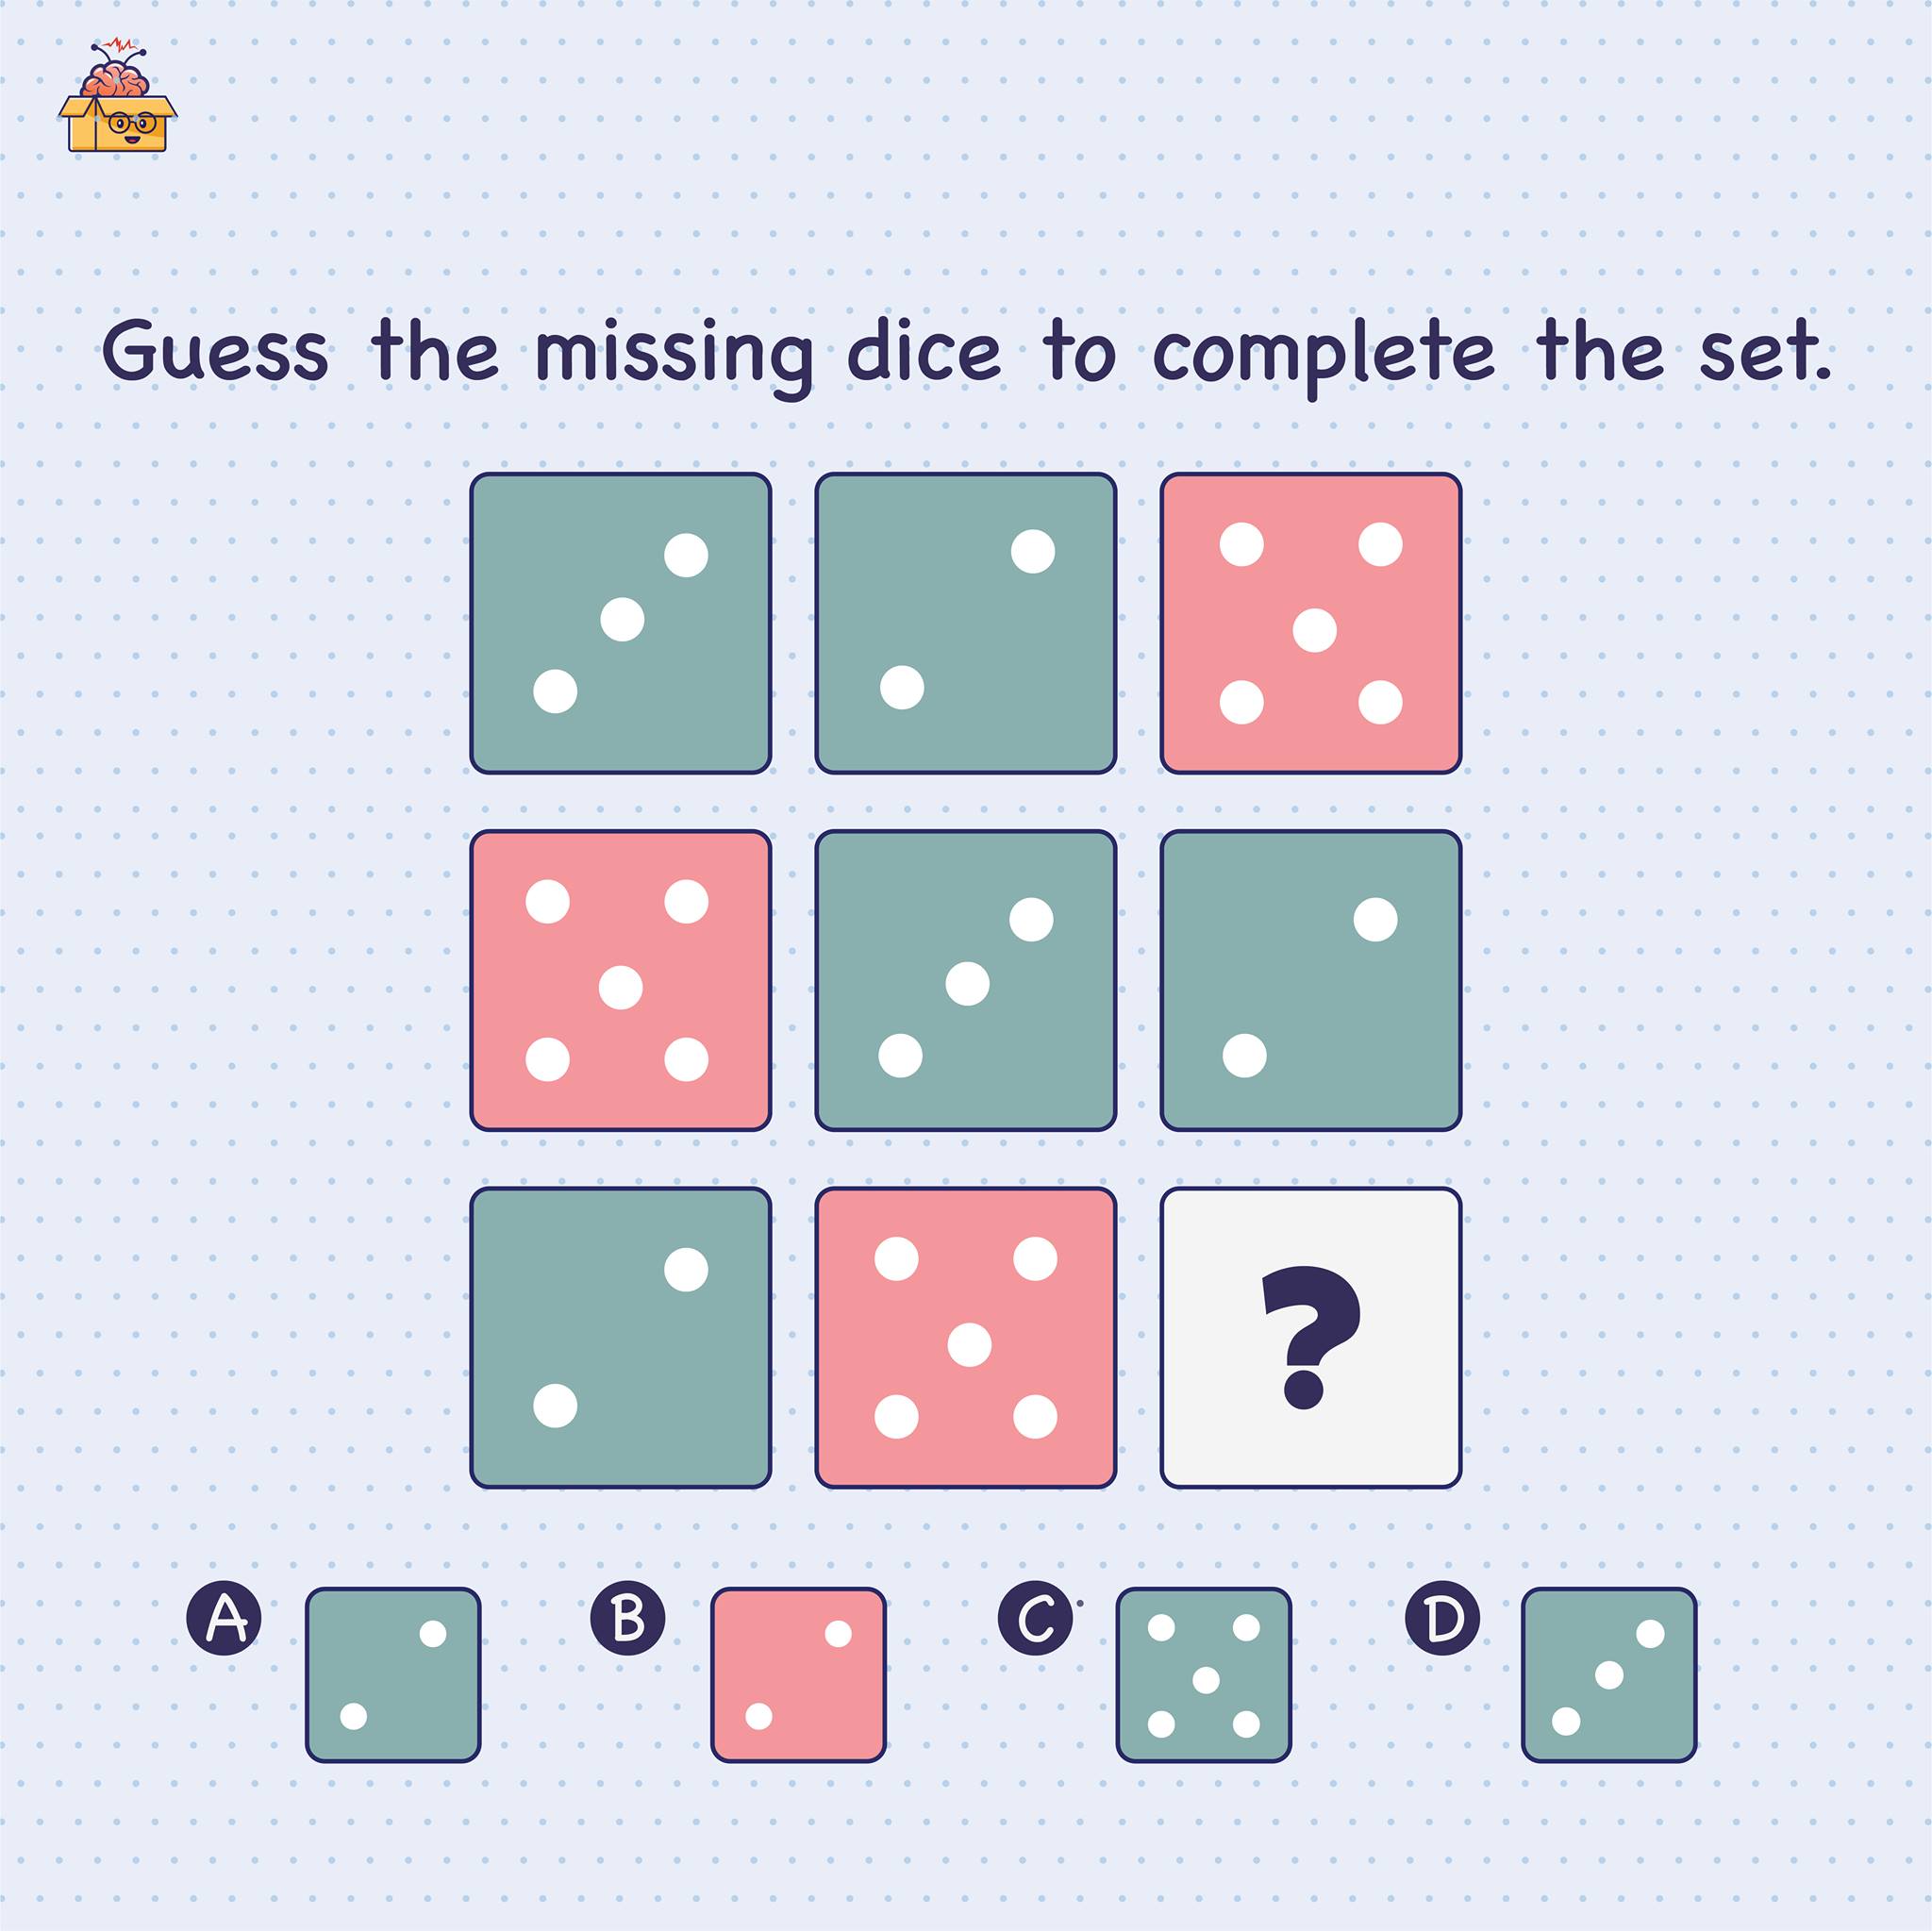 Before you dig into the puzzle, here’s a quick pun: Where do dices go after they die? . . . “Paradice” Now solve this dice puzzle — quick!